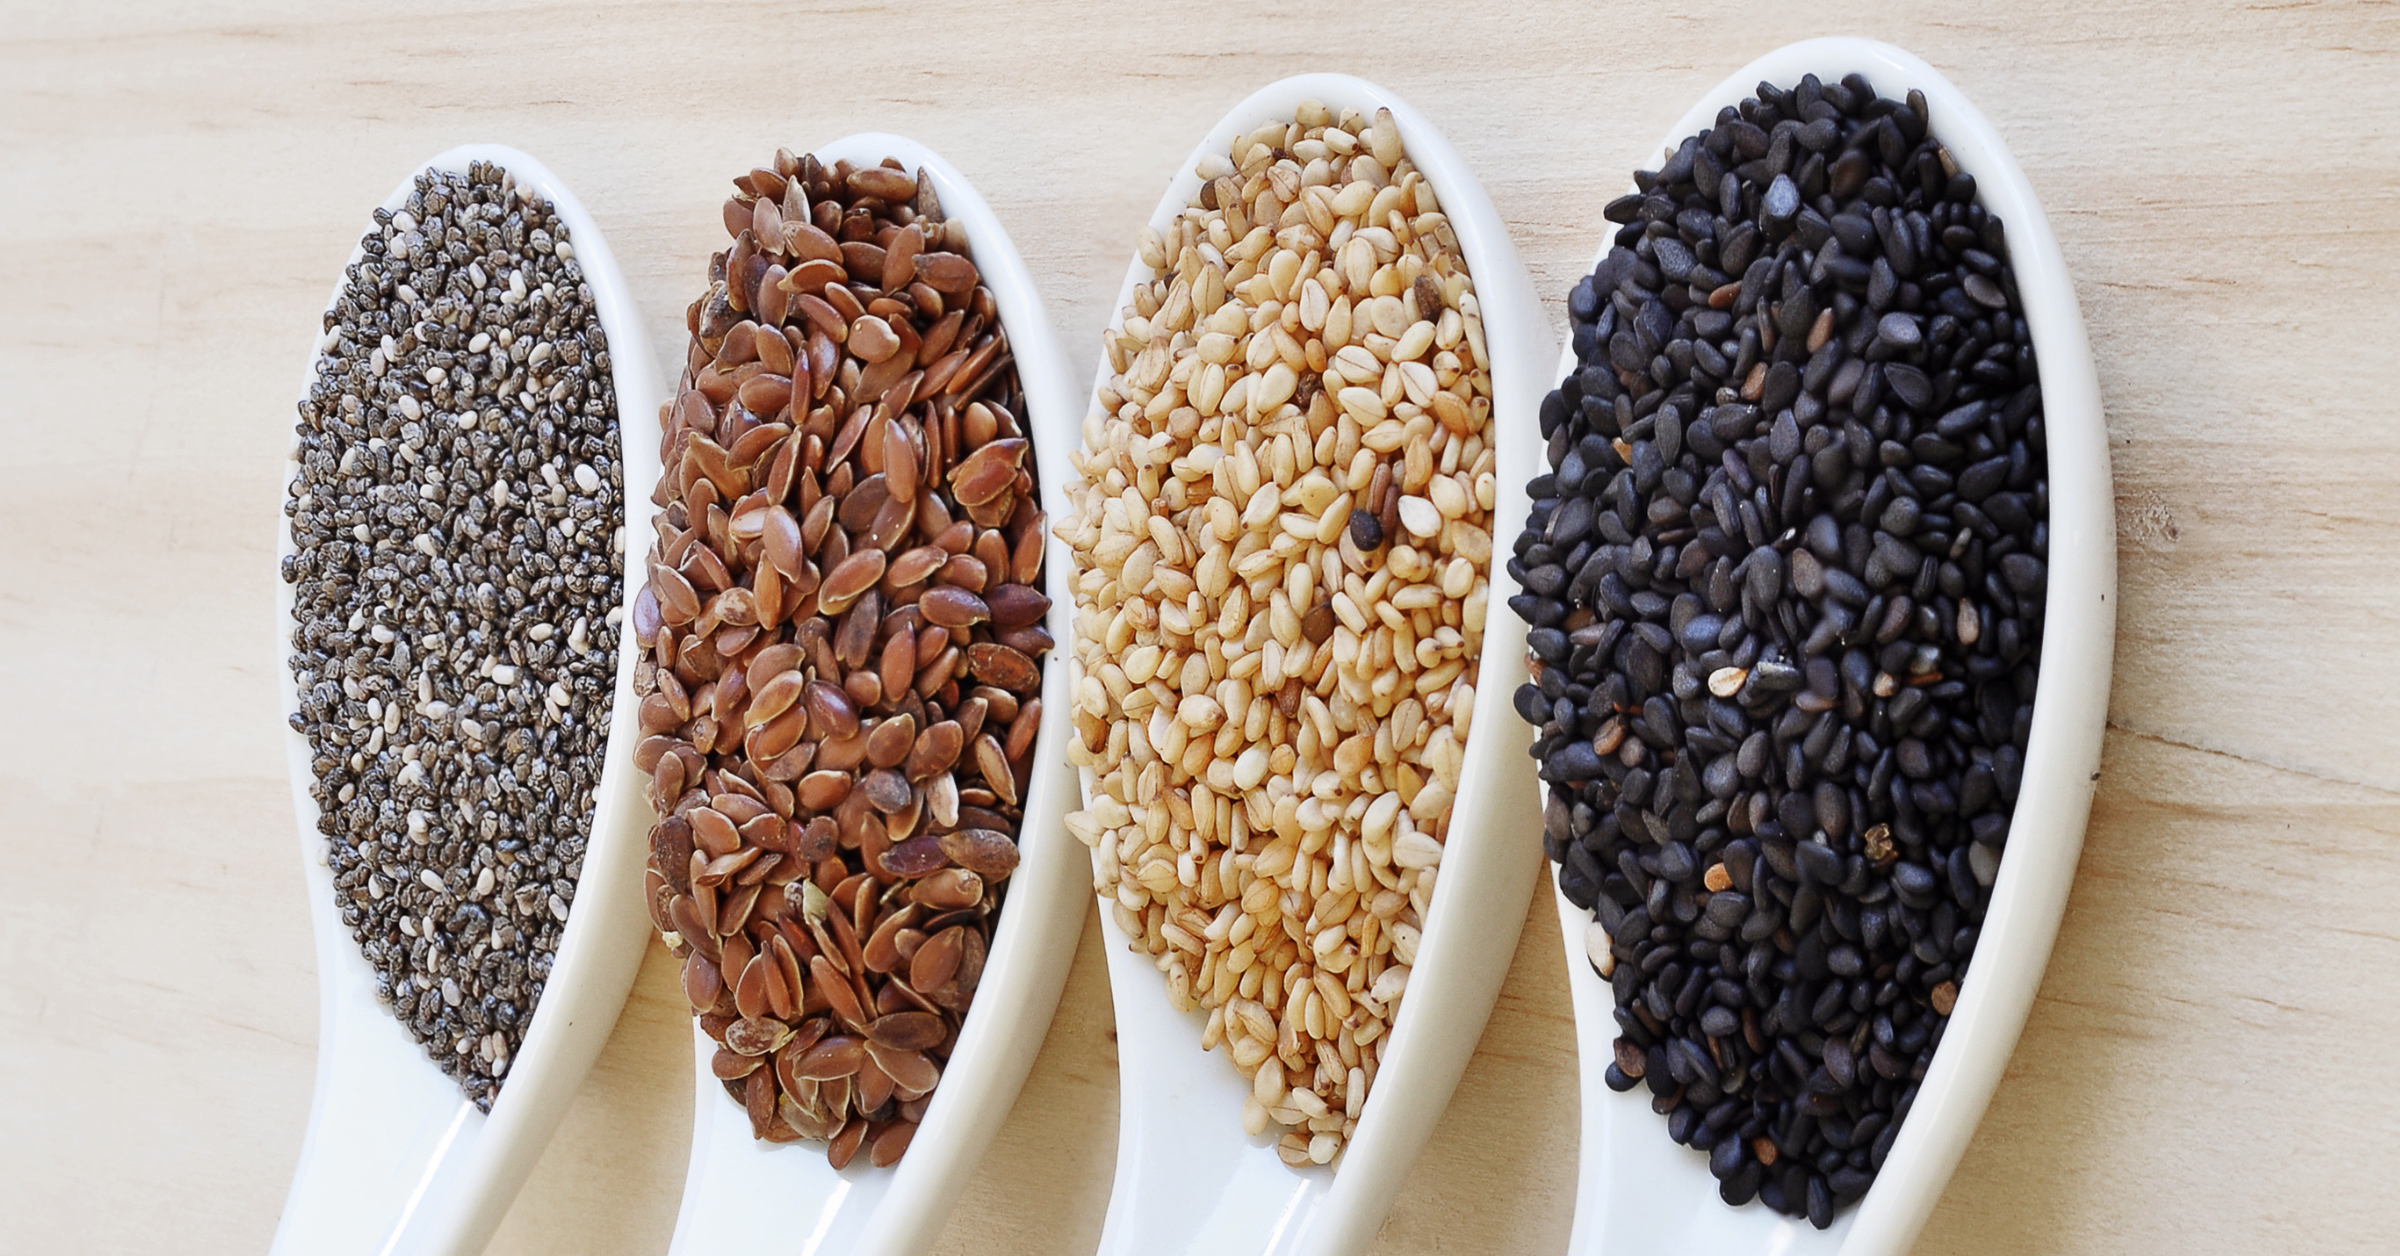 Discover how to balance your hormones using seed cycling, a natural method involving specific seeds to support hormonal health and overall well-being throughout your menstrual cycle